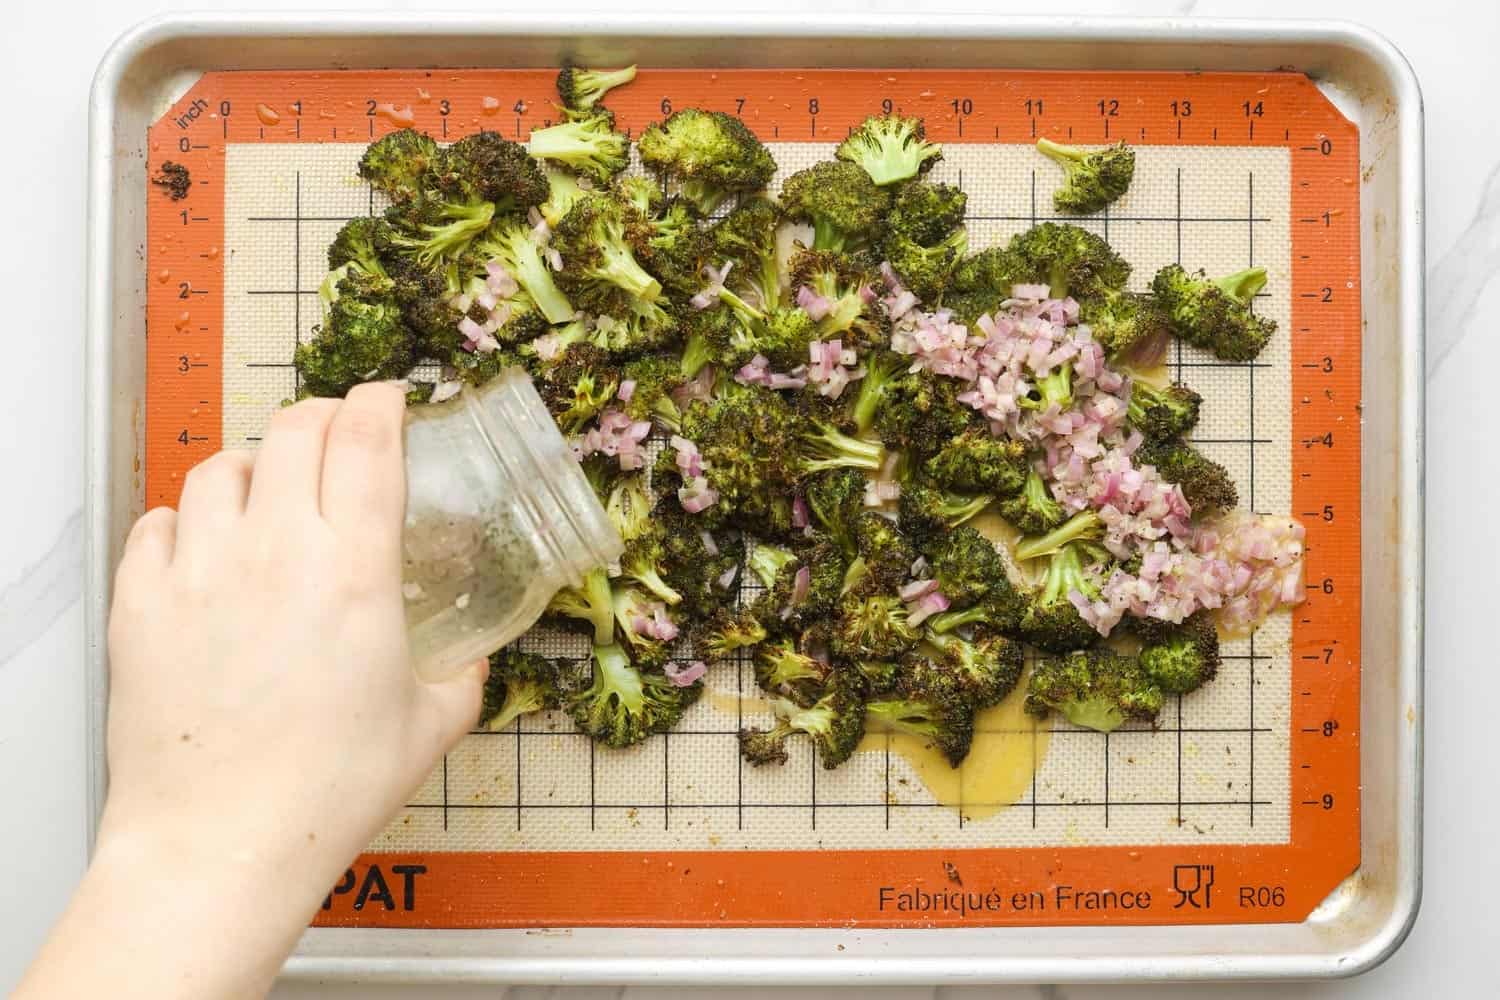 Dressing the roasted broccoli with a shallot vinaigrette